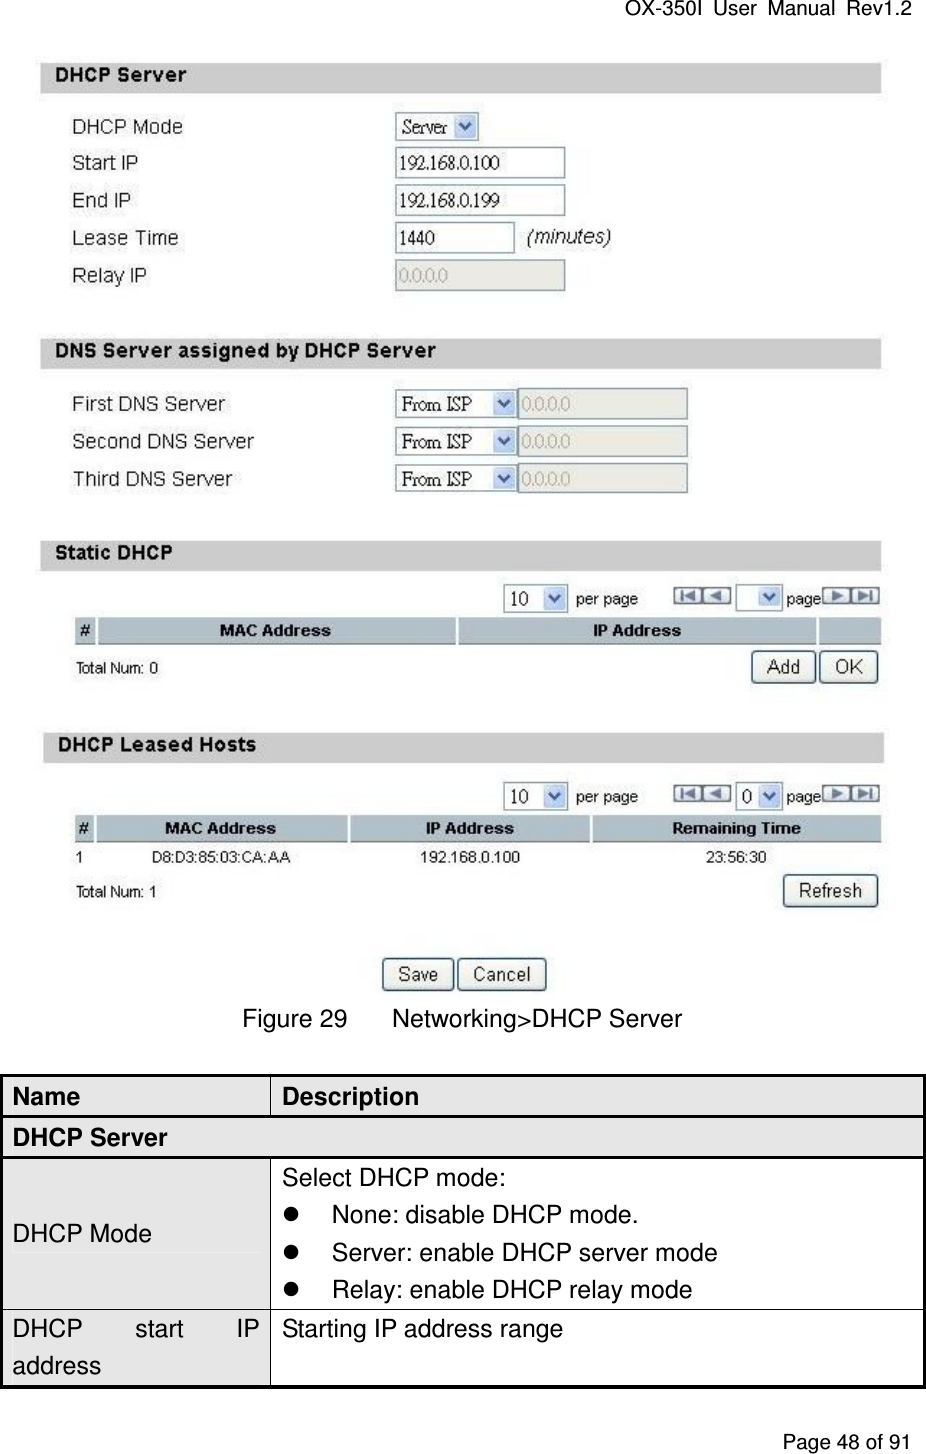 OX-350I  User  Manual  Rev1.2 Page 48 of 91  Figure 29  Networking&gt;DHCP Server Name  Description DHCP Server DHCP Mode Select DHCP mode:   None: disable DHCP mode.   Server: enable DHCP server mode   Relay: enable DHCP relay mode DHCP  start  IP address Starting IP address range 